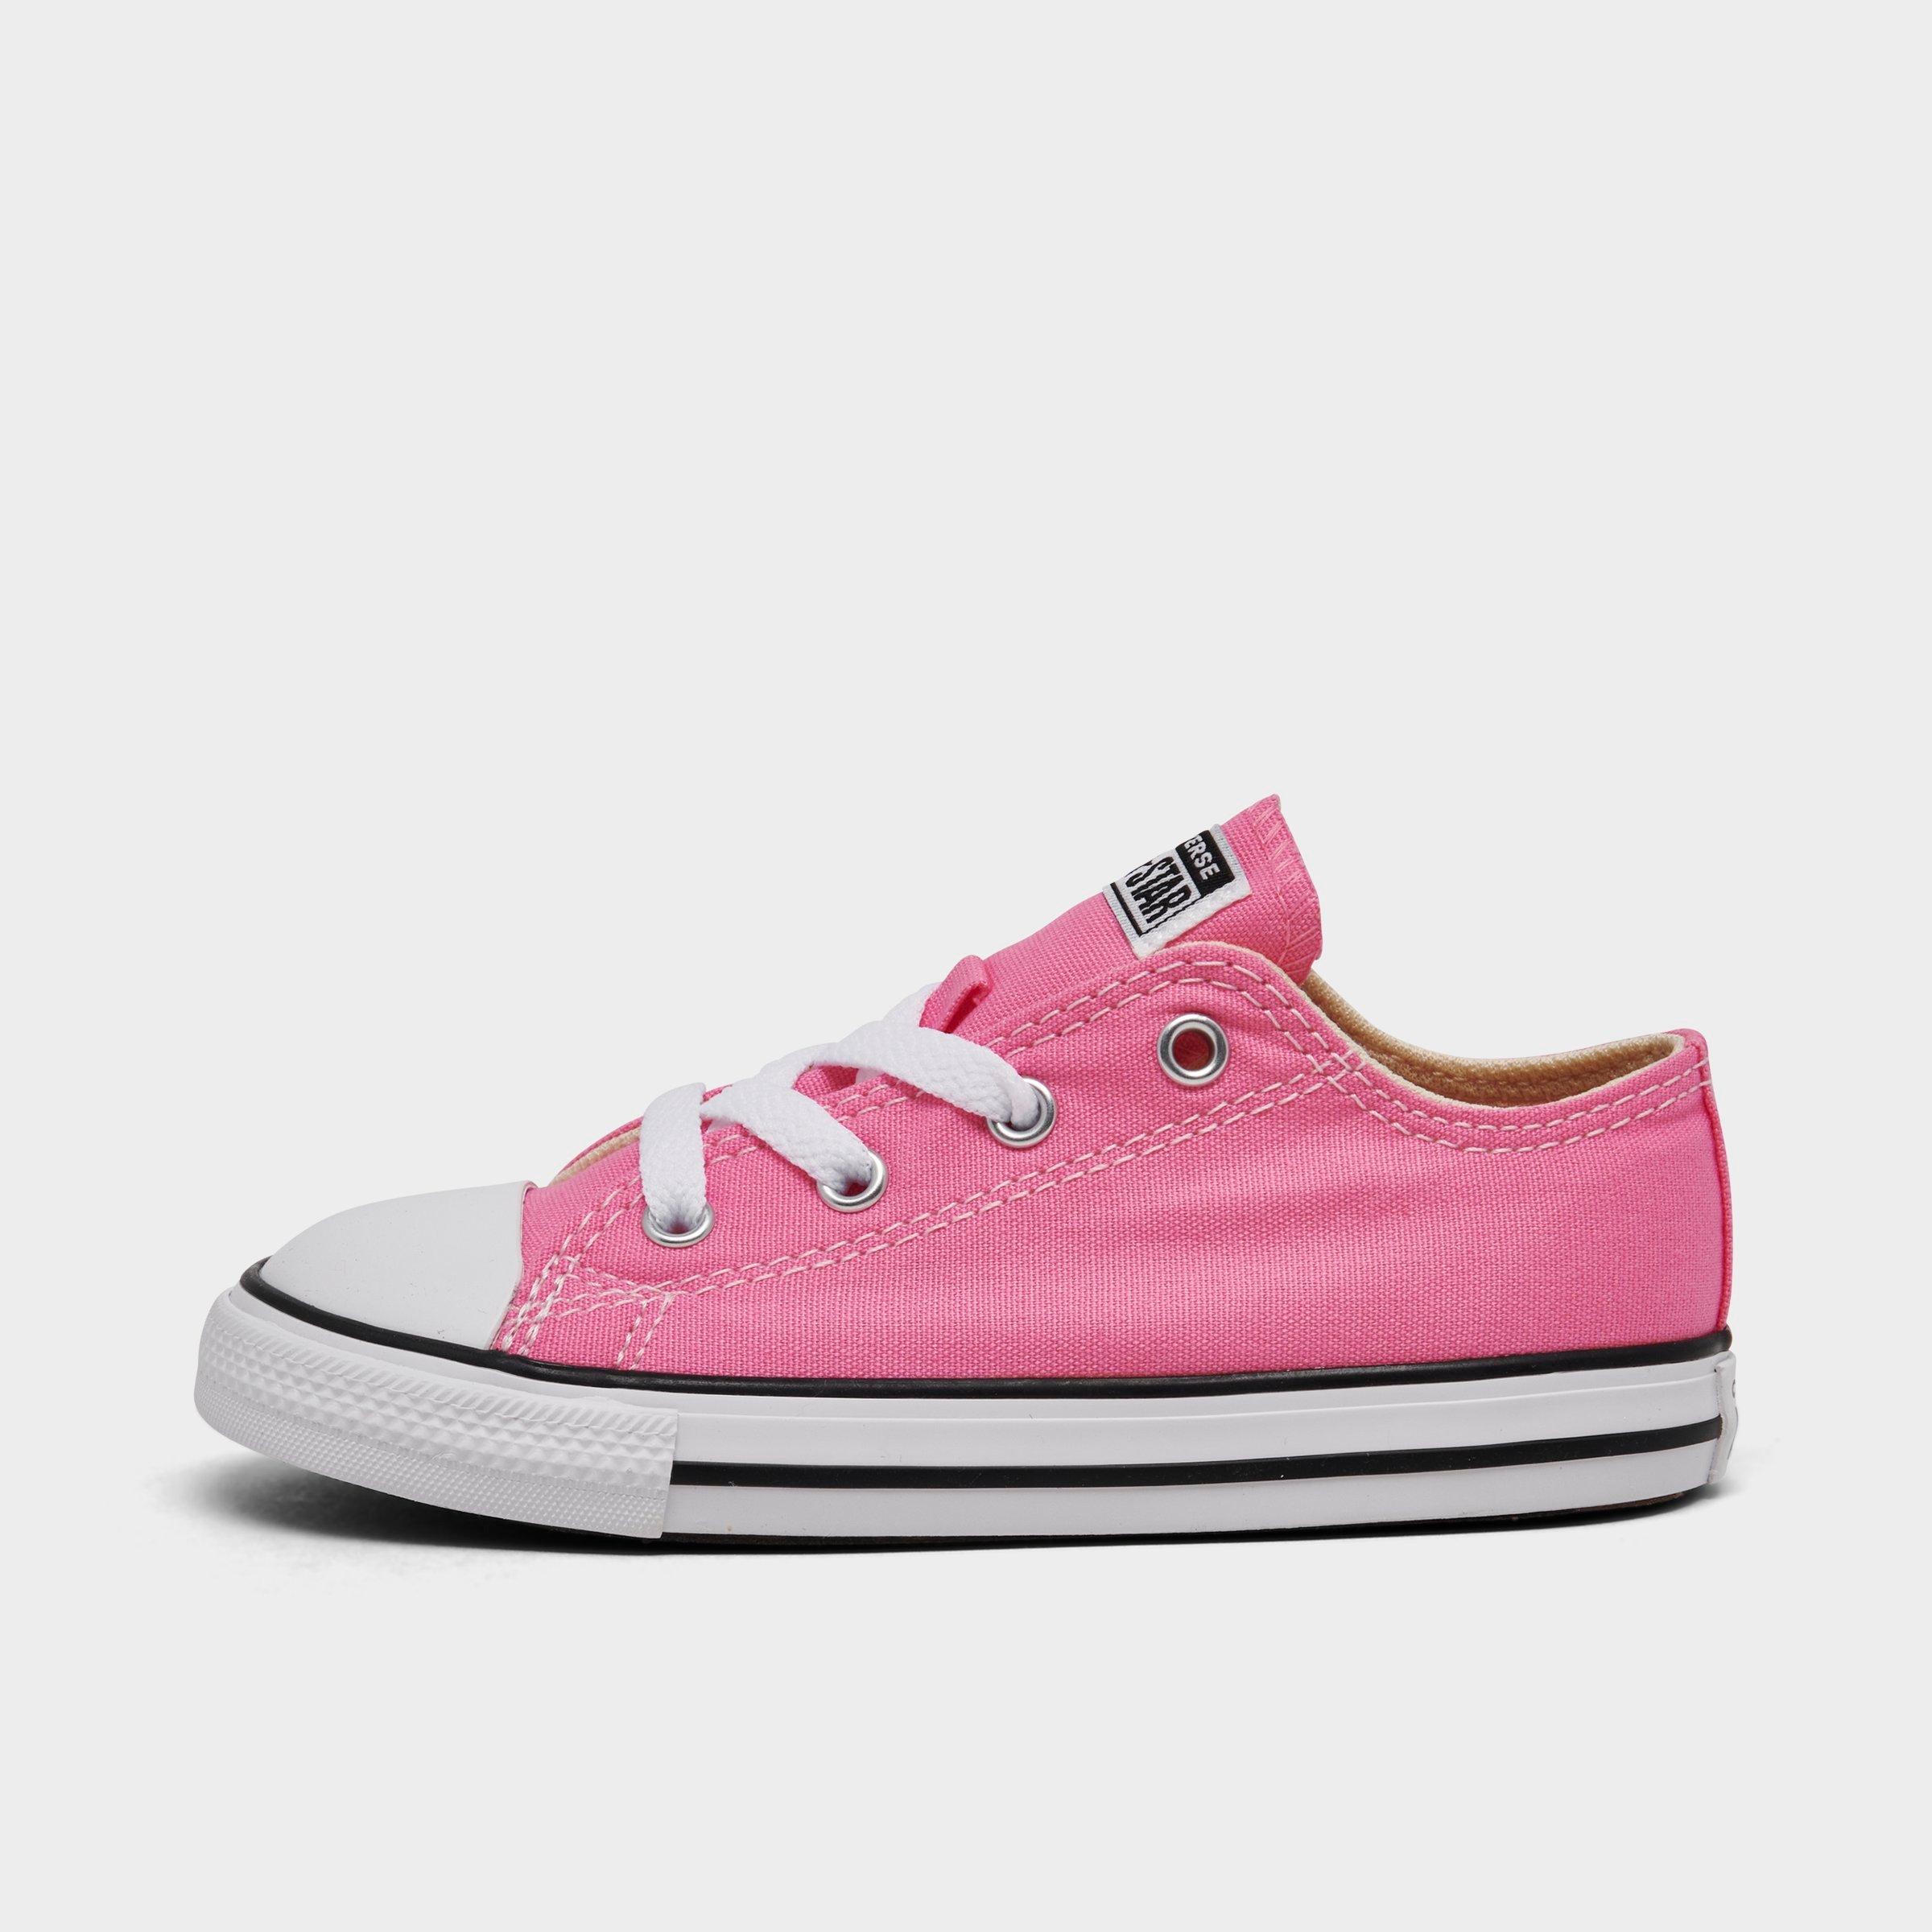 UPC 022866406338 product image for Converse Girls' Toddler Chuck Taylor Low Top Casual Shoes in Pink/Pink Size 5.0  | upcitemdb.com